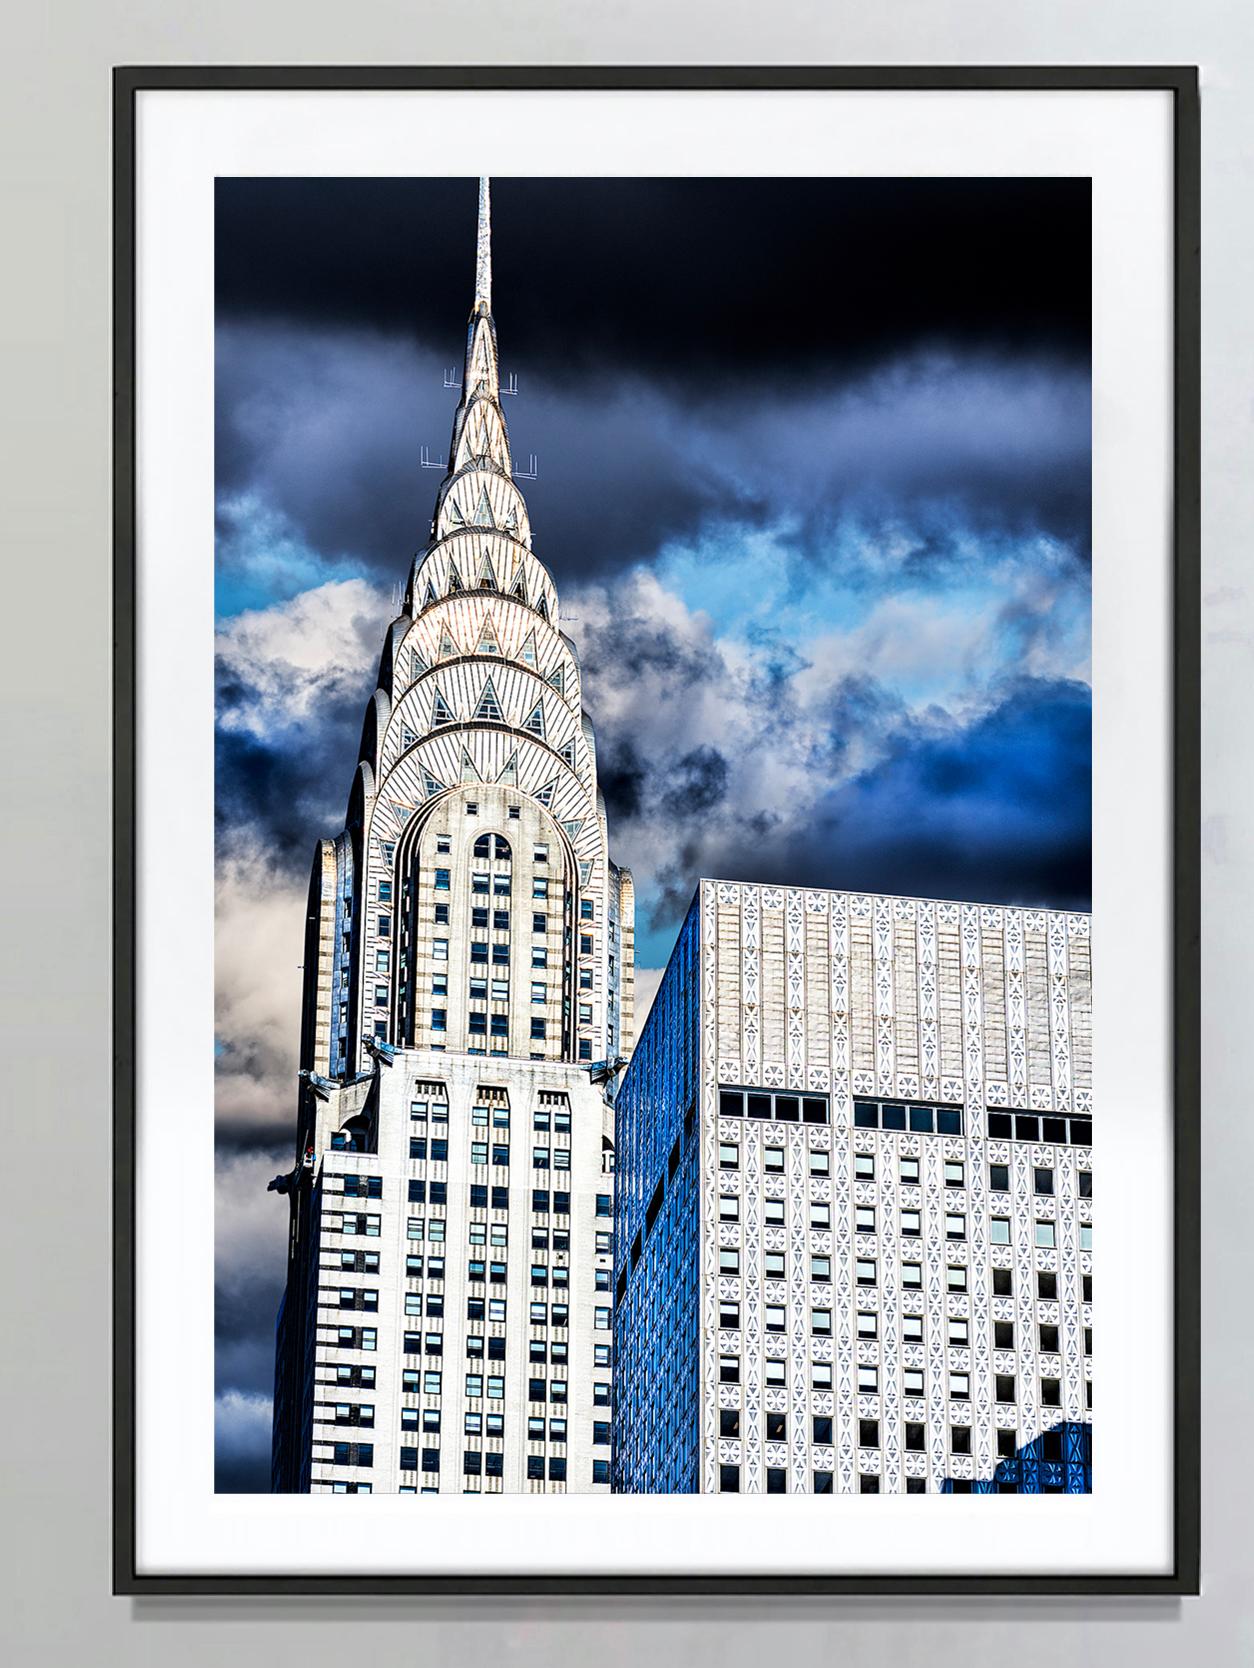 Top Of Chrysler Building Against Dramatic Clouds - Photograph by Mitchell Funk